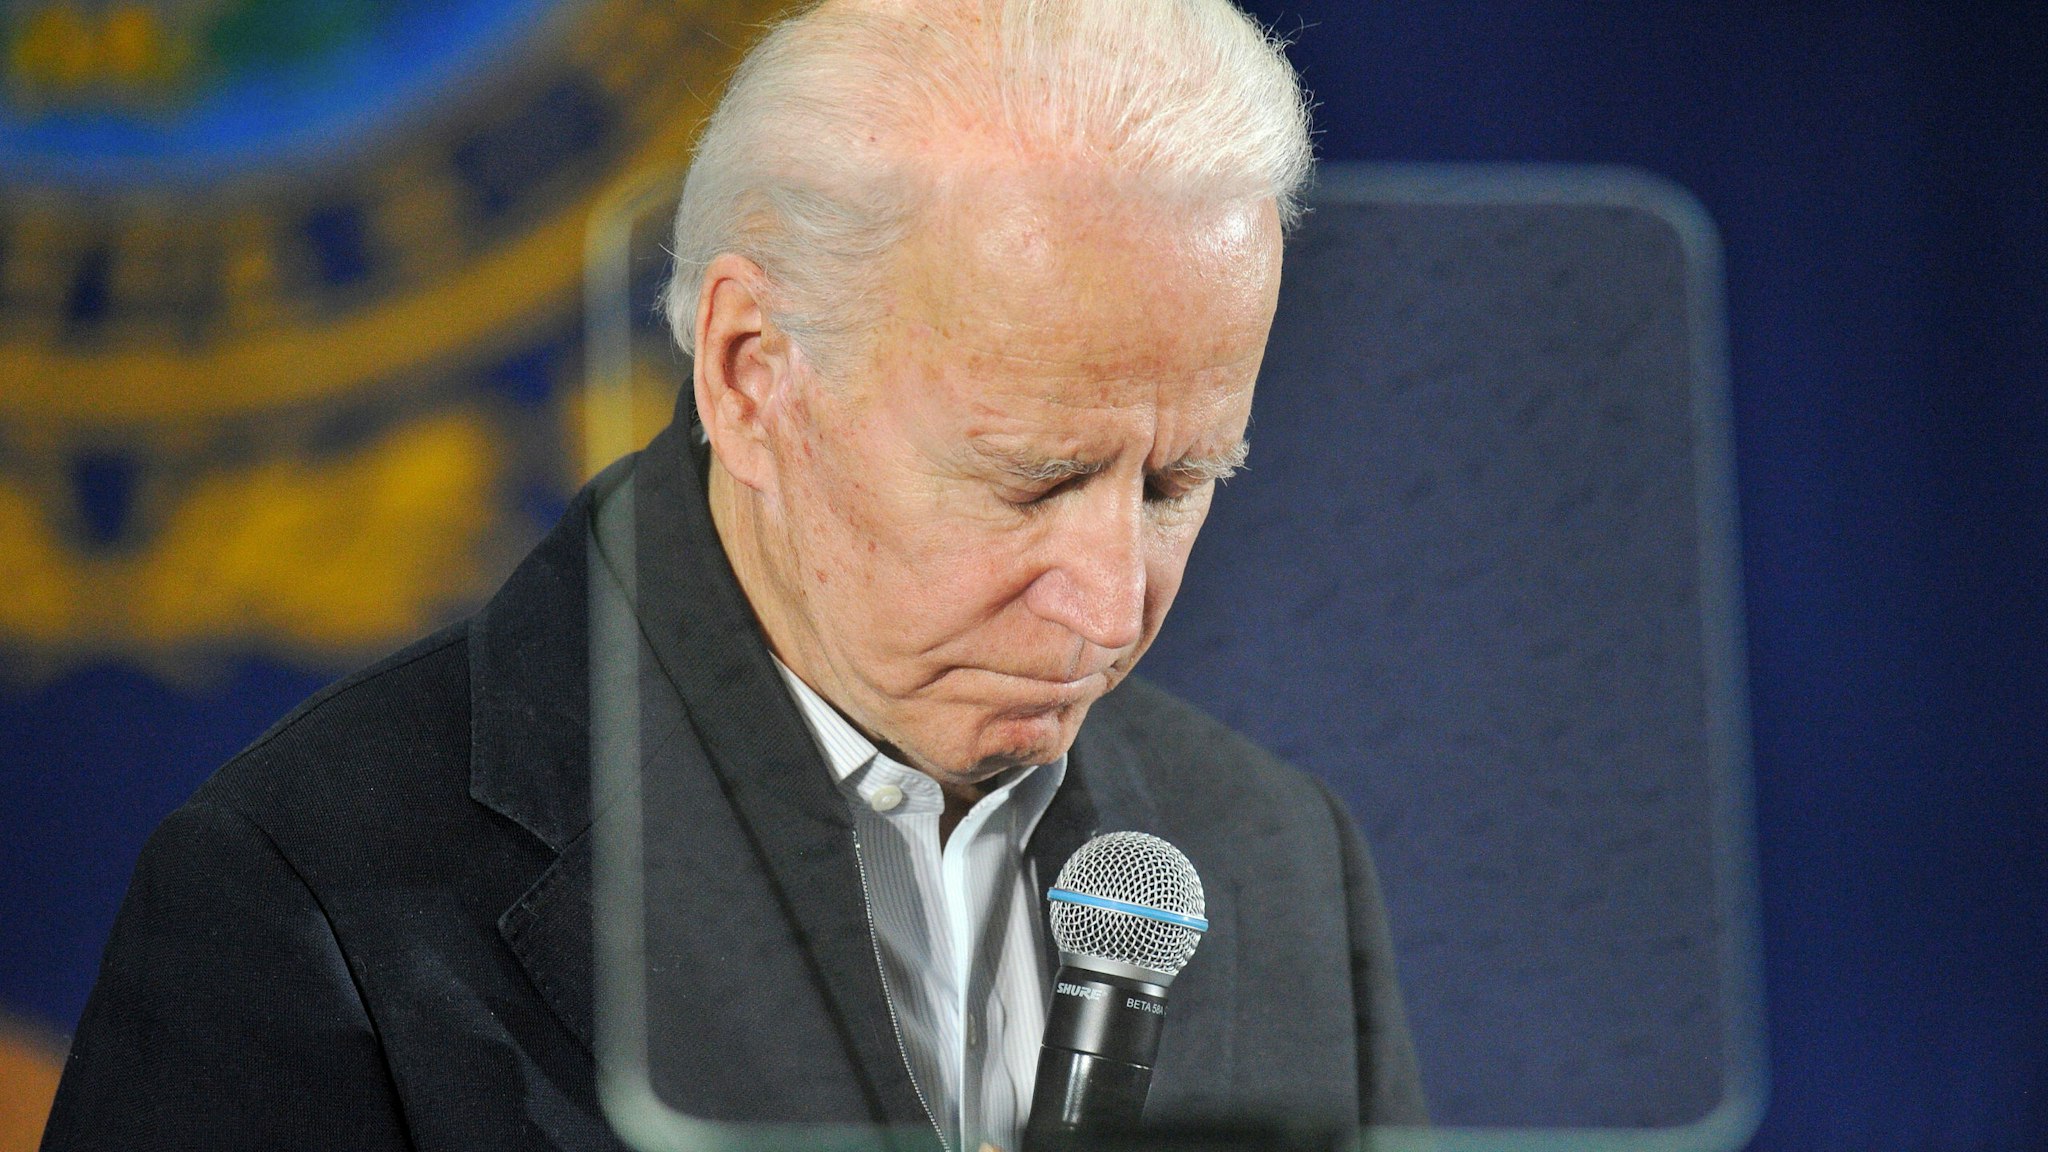 TOPSHOT - US Presidential candidate and former US Vice President Joe Biden gestures as he addresses supporters and curious voters at the IBEW Local 490 in Concord, New Hampshire on February 4, 2020. - Democratic White House candidate Pete Buttigieg seized a shock lead in the chaotic Iowa caucuses, closely trailed by leftist senator Bernie Sanders, according to partial returns released on Tuesday after an embarrassing delay in reporting the results. Progressive standard-bearer Elizabeth Warren was in third place followed by Joe Biden, a disappointing showing for the former vice president who has claimed he is best positioned to defeat Donald Trump in November.